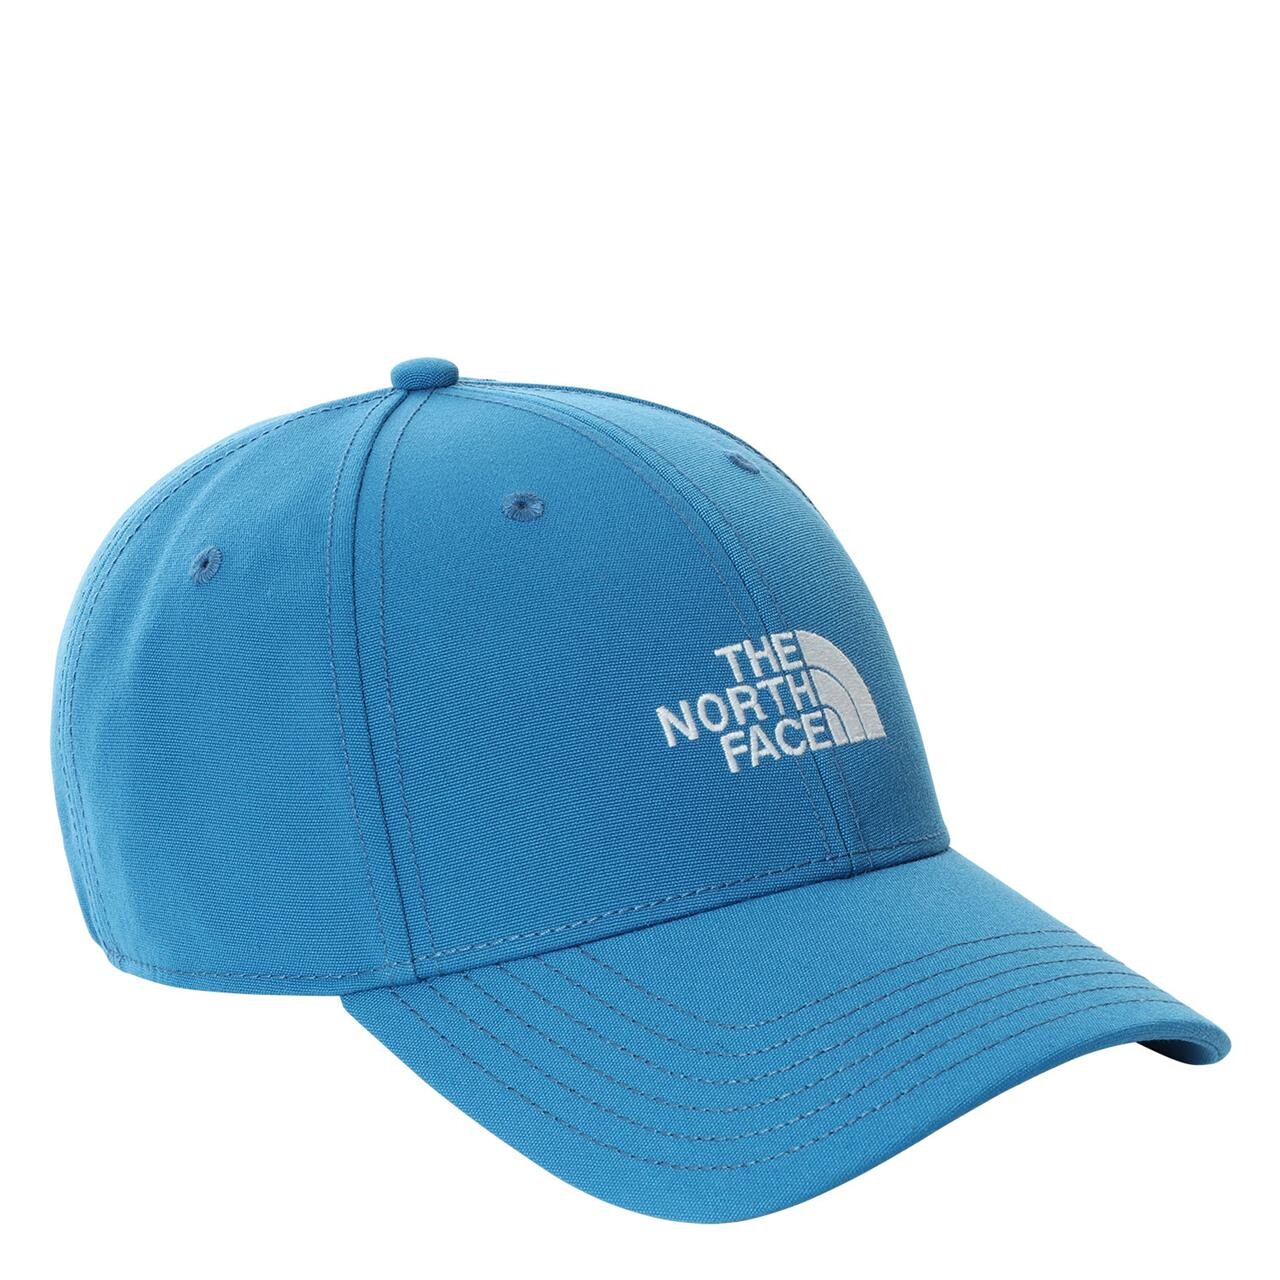 The North Face Recycled 66 Classic Hat (Blå (BANFF BLUE) One size)